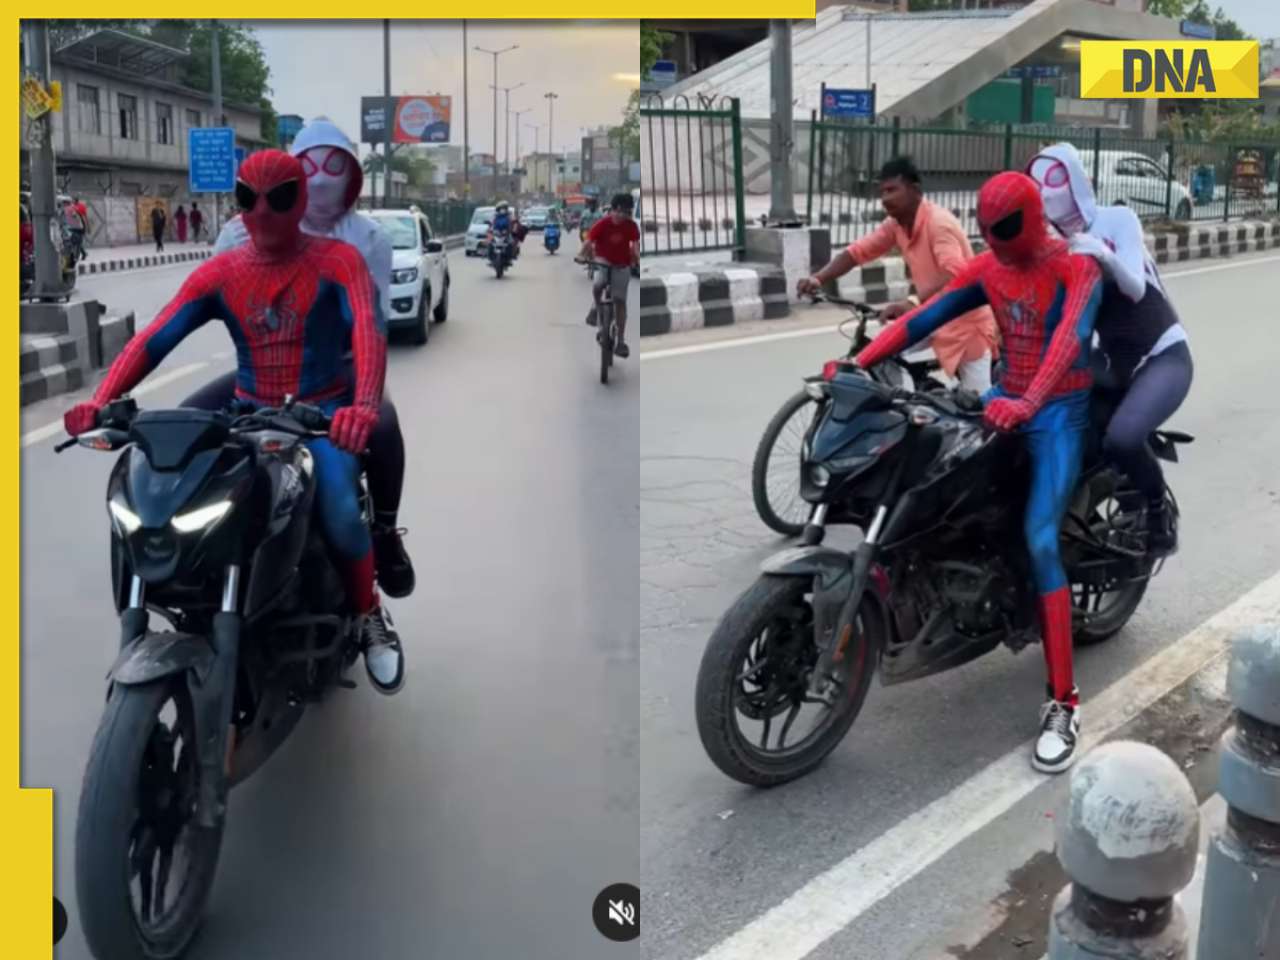 Viral video: Delhi's 'Spiderman' take to streets on bike, get arrested; watch